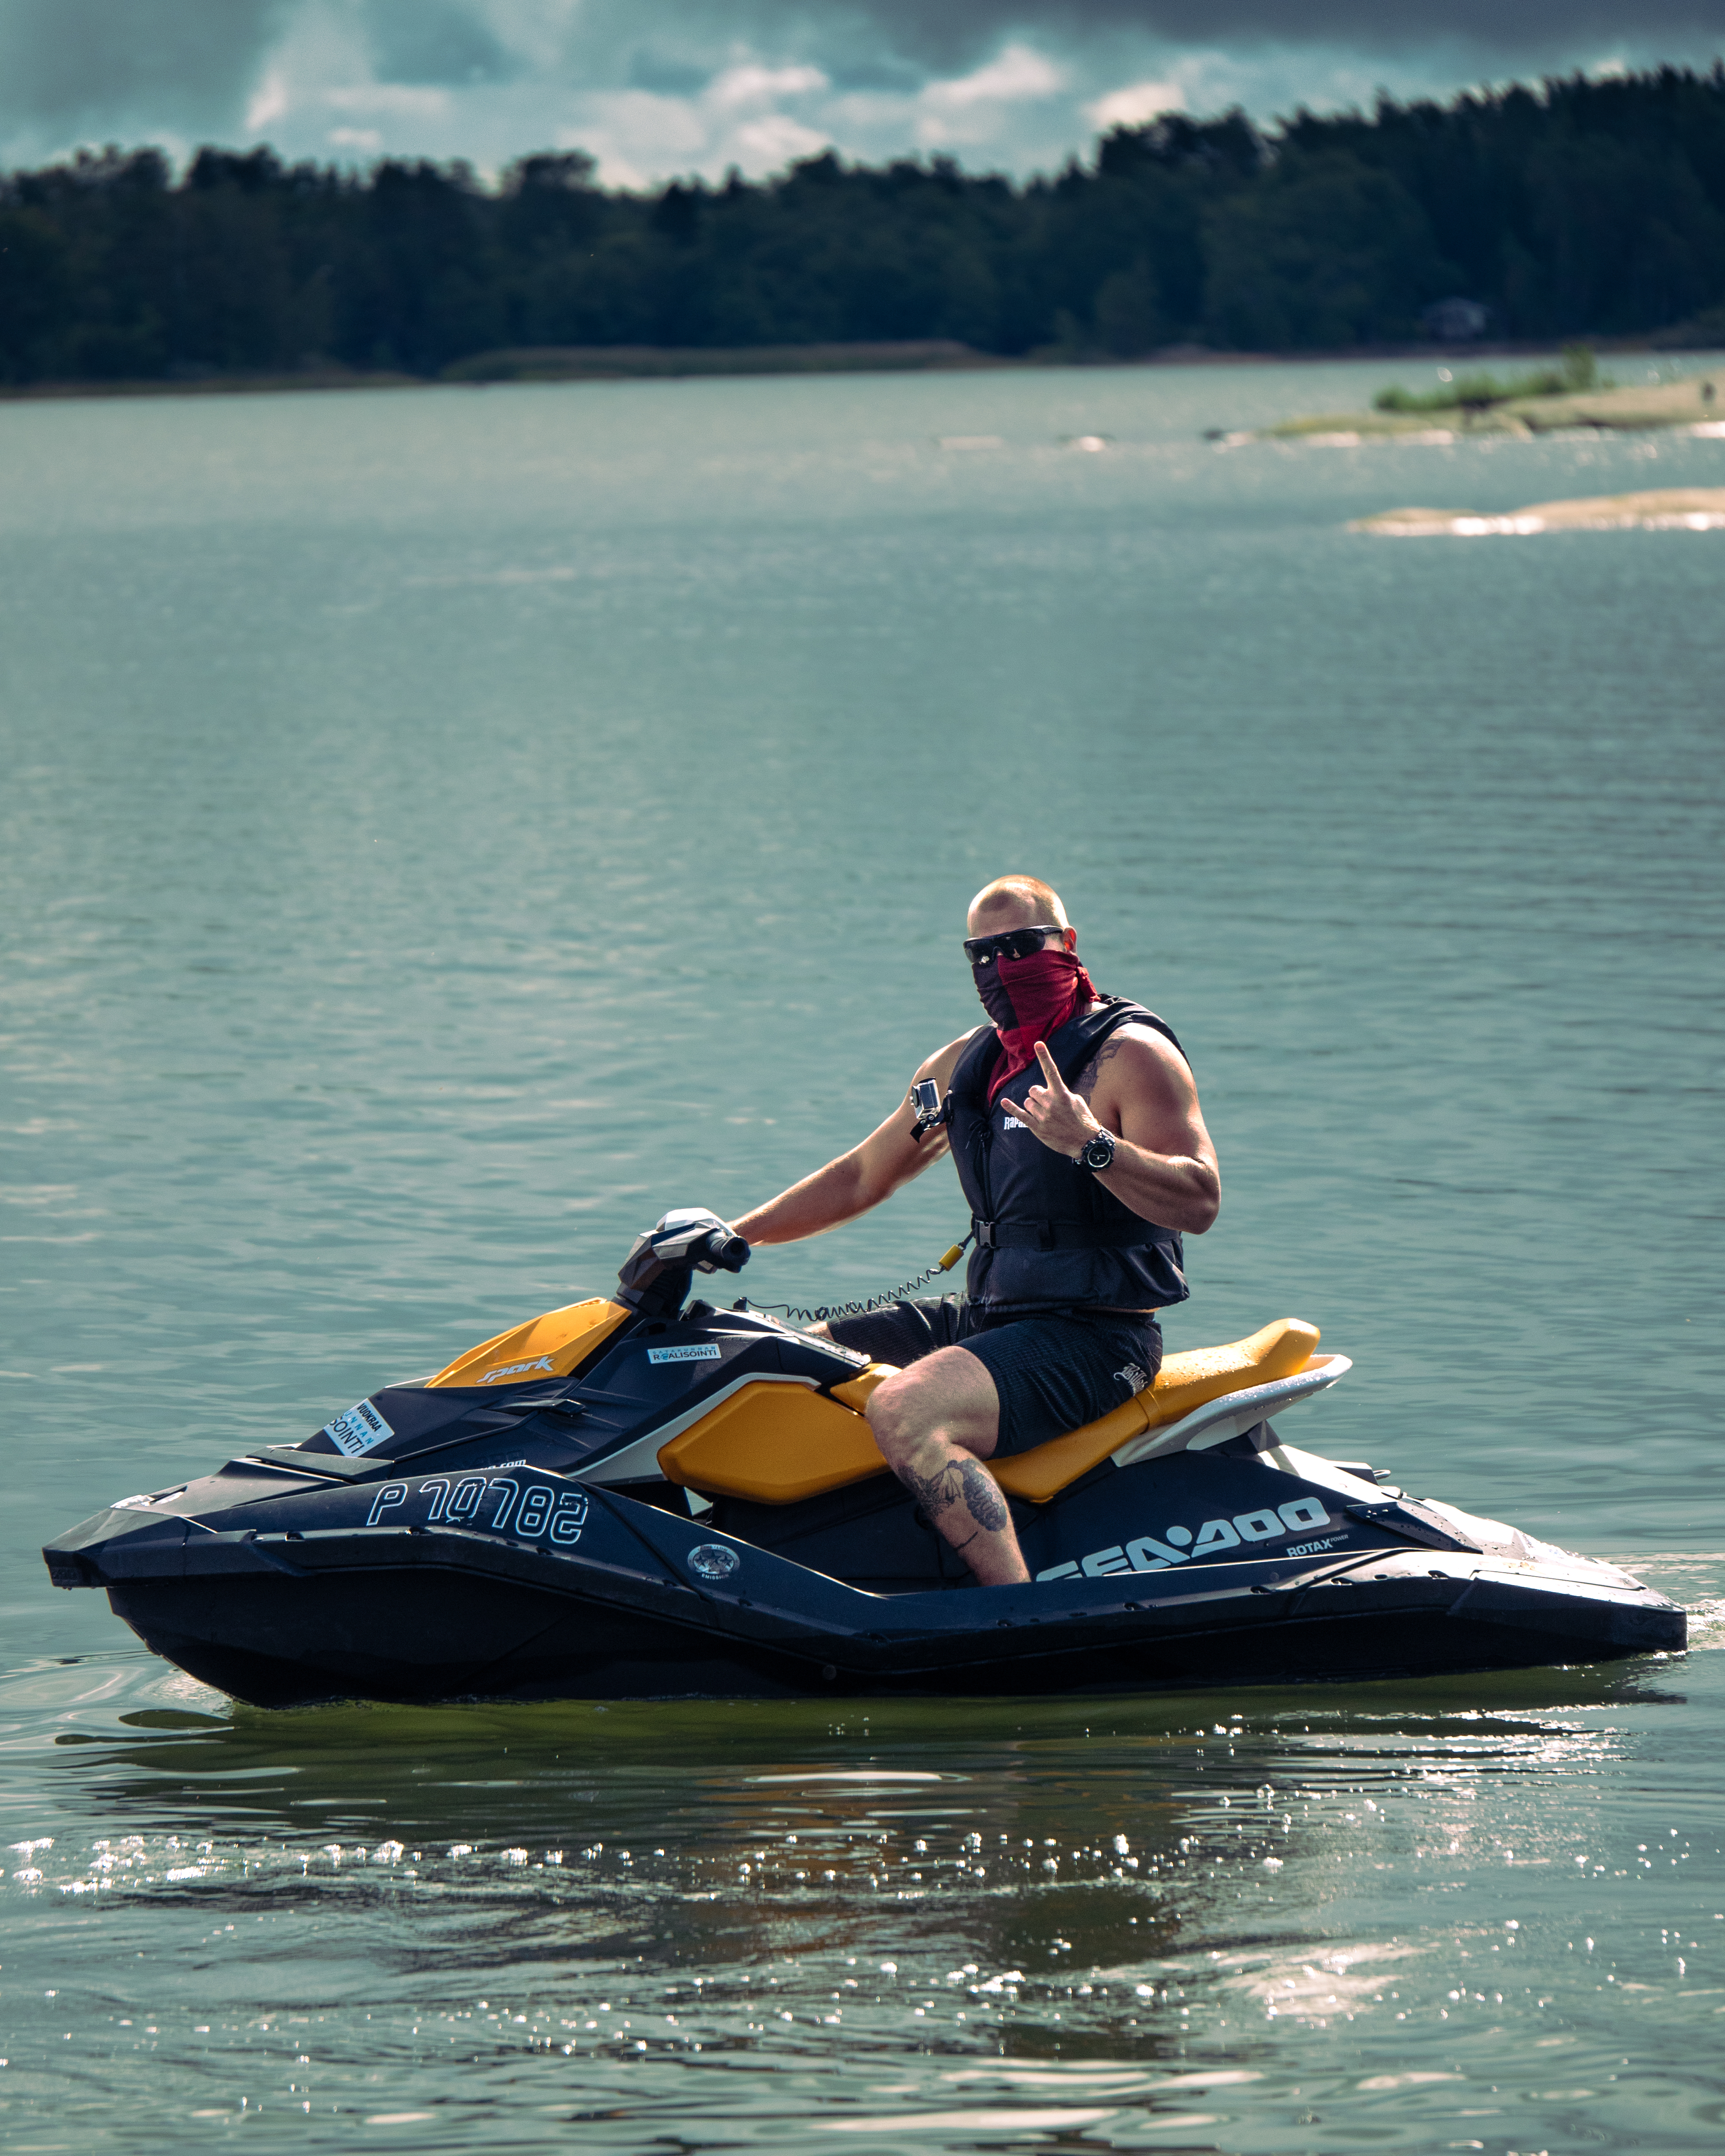 Muscular man on a jet ski. Wearing a red bandana, sunglasses, a life west and shorts. He is in a lake.